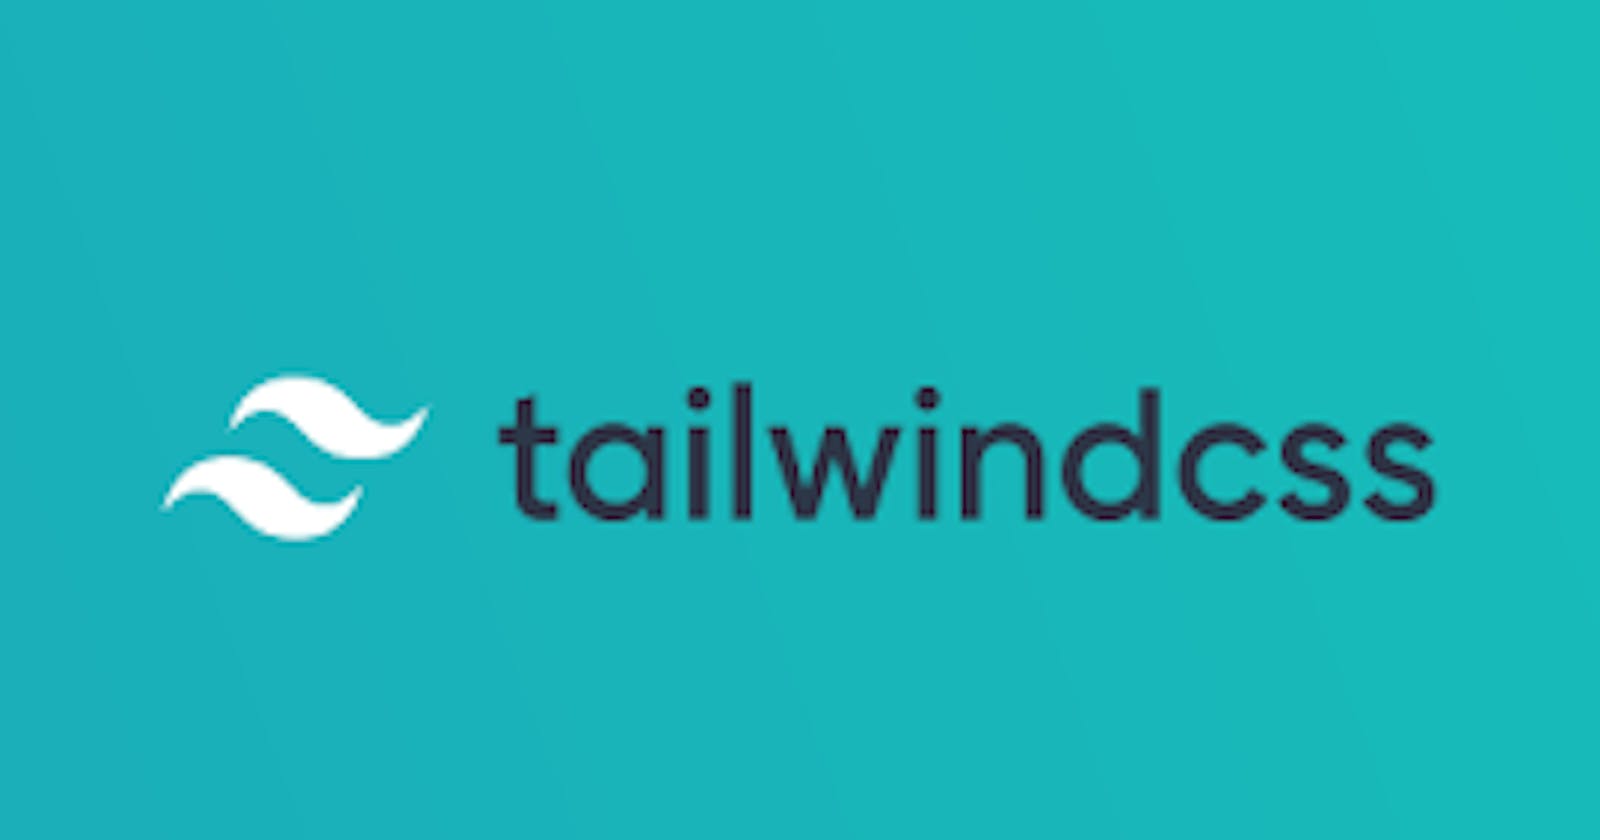 Tailwind to the Rescue of Responsiveness